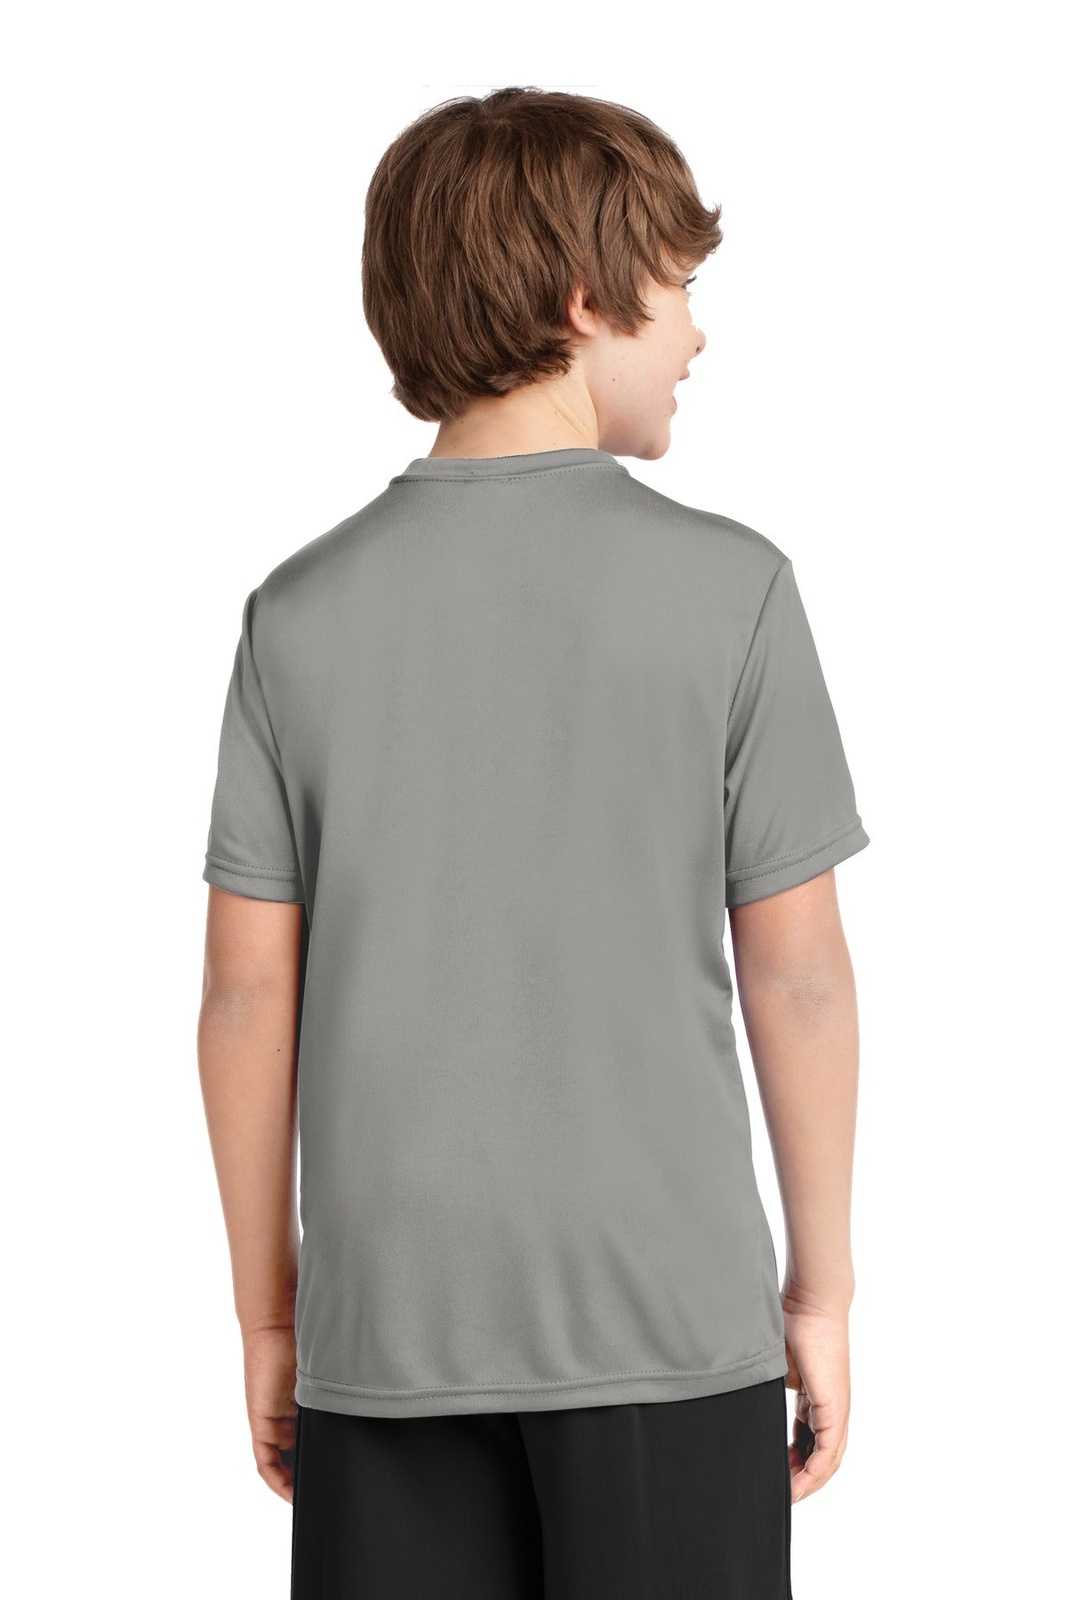 Port & Company PC380Y Youth Performance Tee - Gray Concrete - HIT a Double - 1